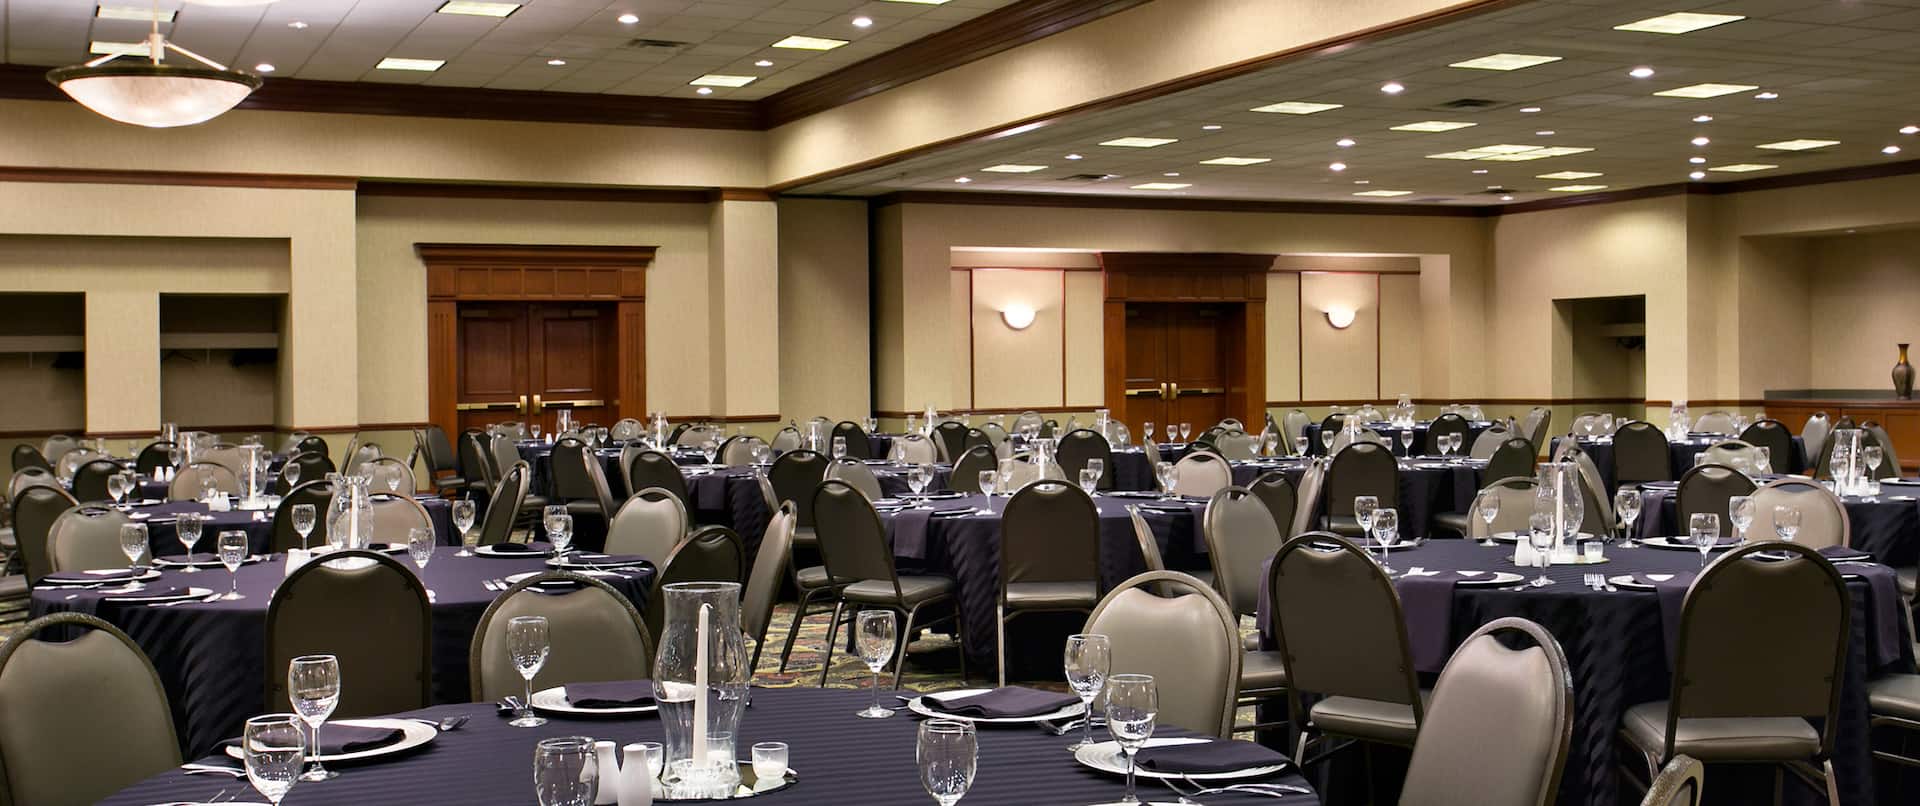 Events in Lexington, KY Facilities and Meeting Space at Embassy Suites